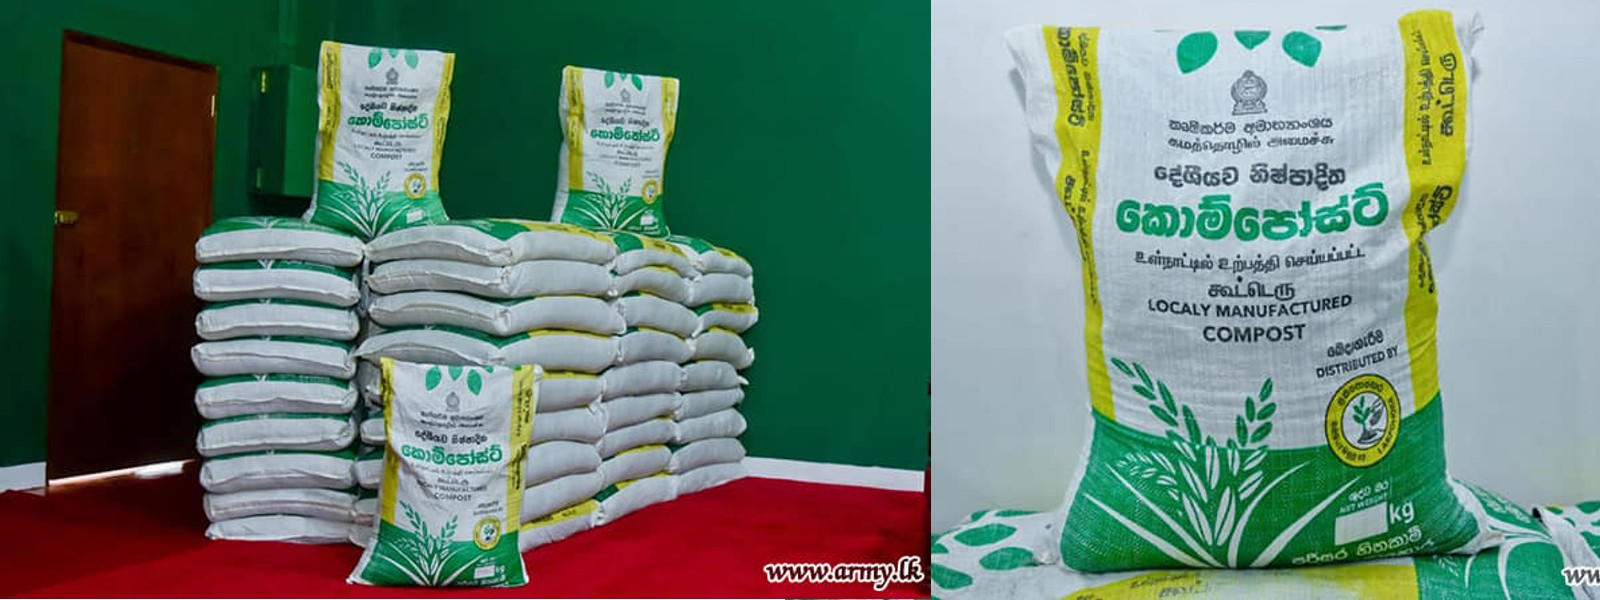 Army produced organic fertilizer handed over to ‘Lak Pohora’